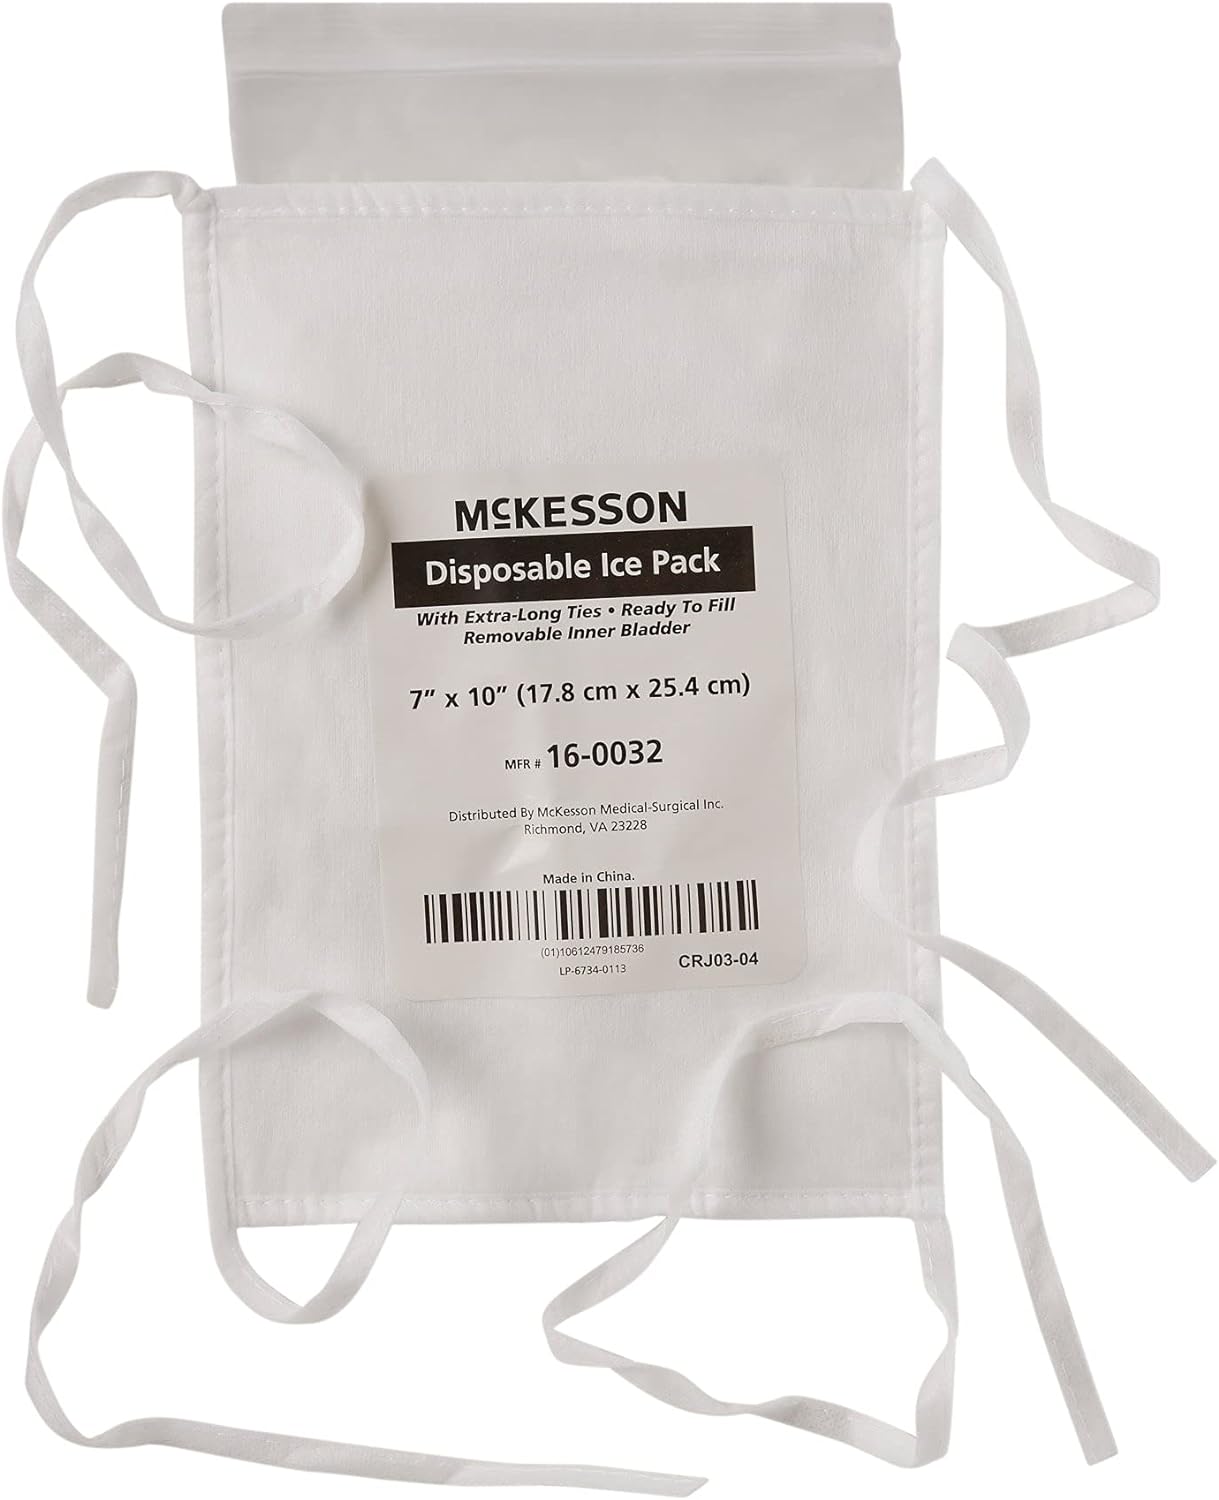 McKesson Disposable Ice Pack Bag, Tie Straps, 7 in x 10 in, 10 Count, 1 Pack